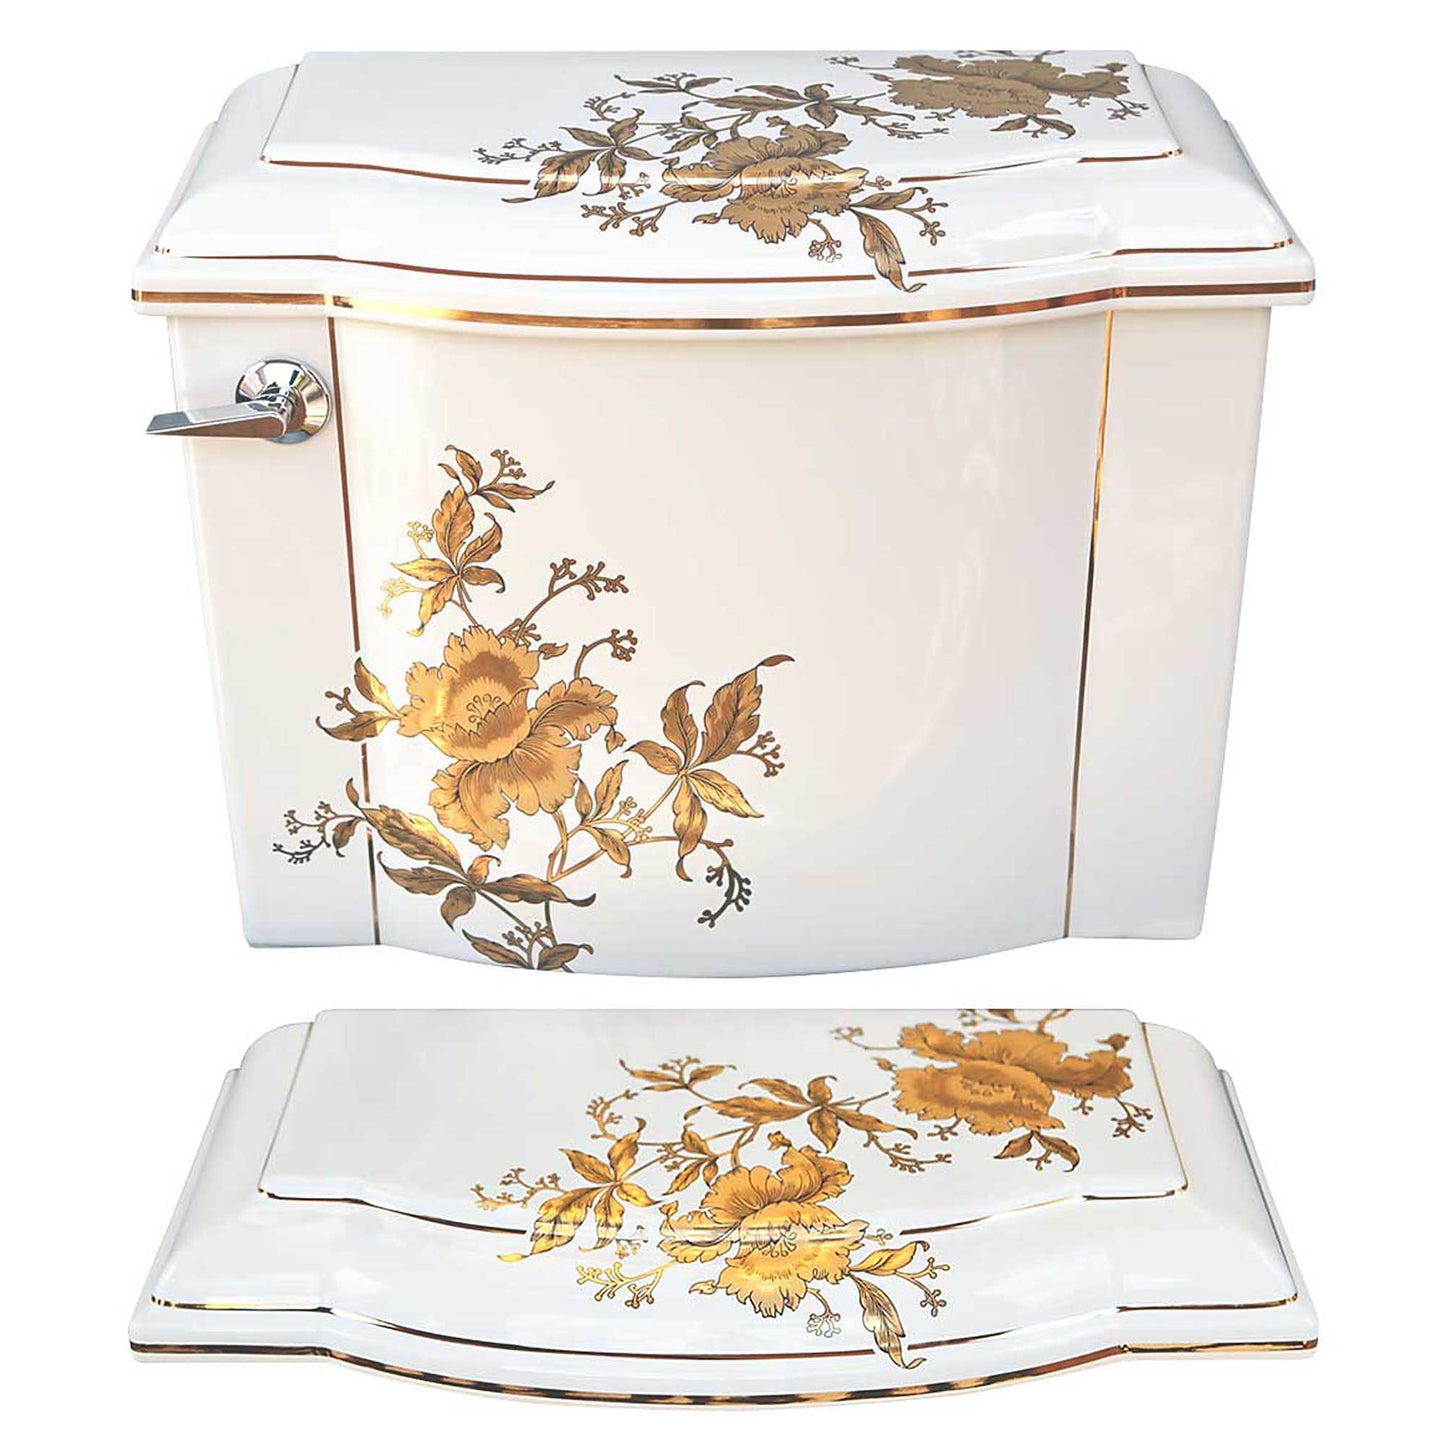 White Kohler toilet painted with beautiful design of gold bands and orchids